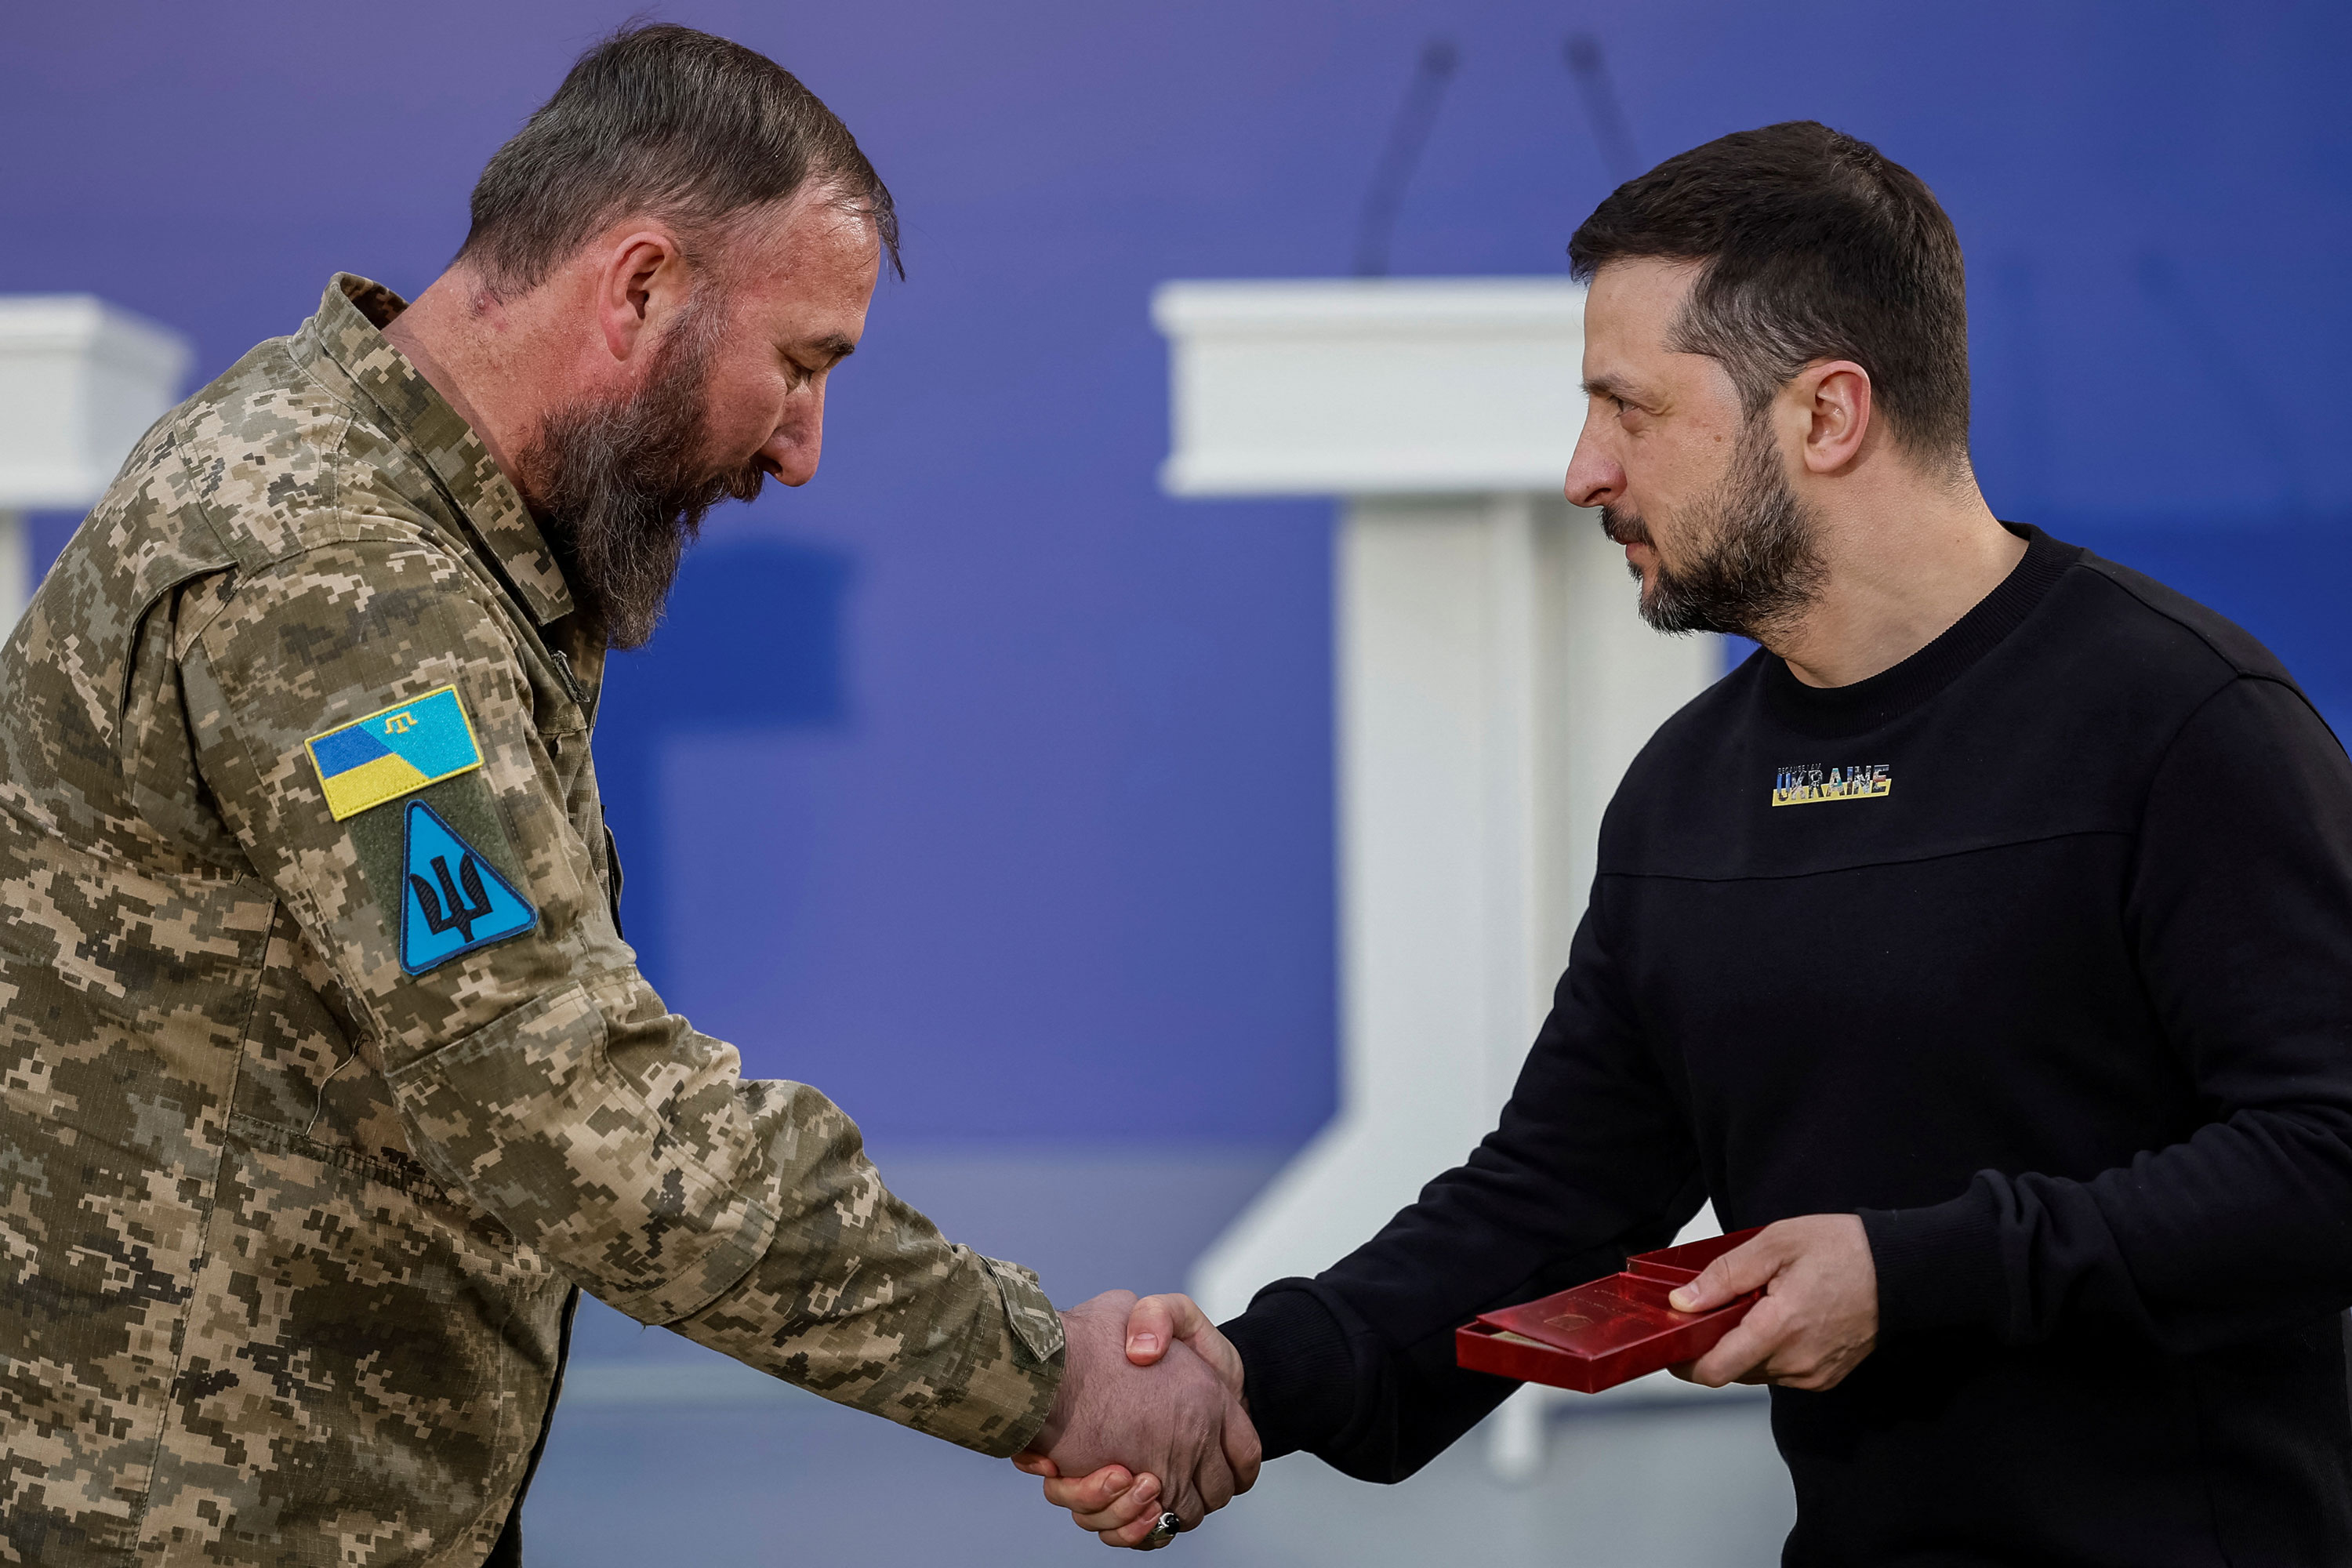 Ukrainian President Volodymyr Zelensky honors Muslim soldier Ilimdar Khodzhametov with The "Defender of the Motherland" medal before sharing Iftar with Ukrainian Muslim soldiers in a front of a mosque in the outskirts of Kyiv on April 7. 